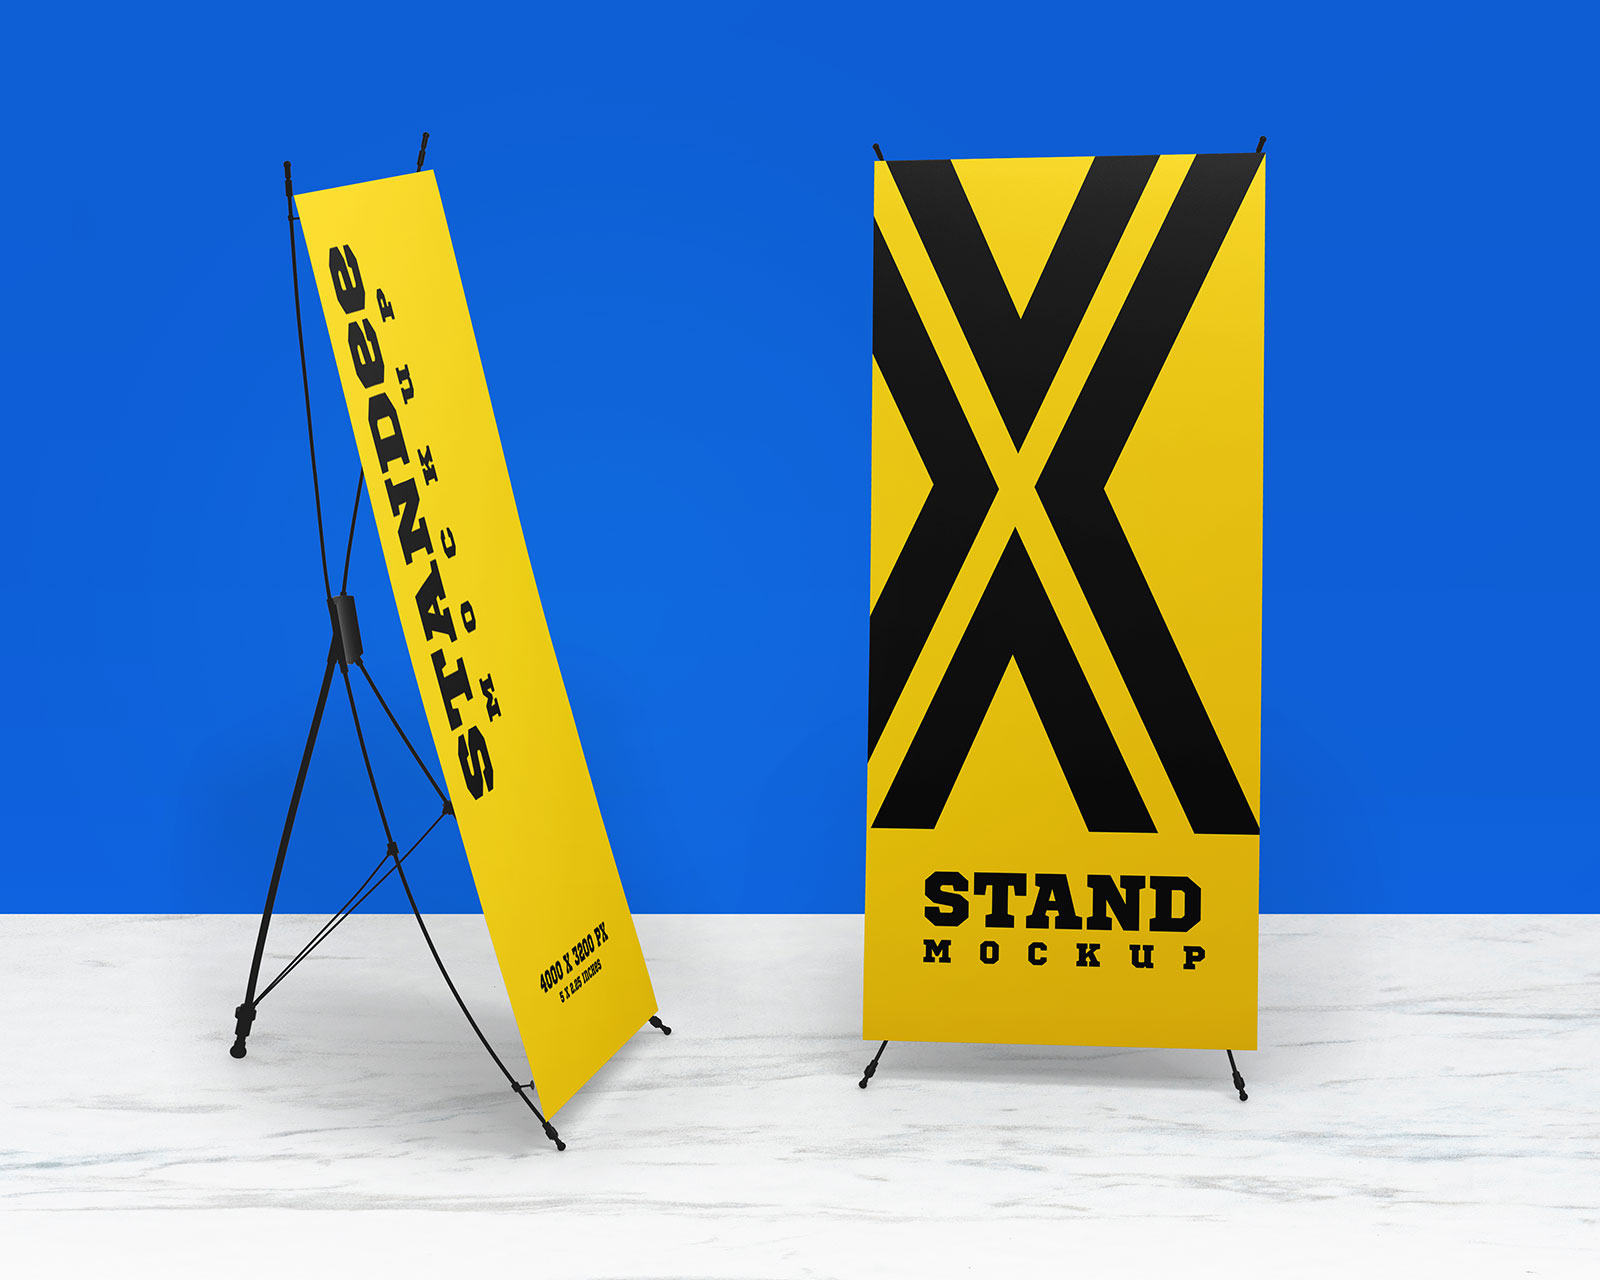 Free 6041+ X Banner Mockup Free Psd Yellowimages Mockups